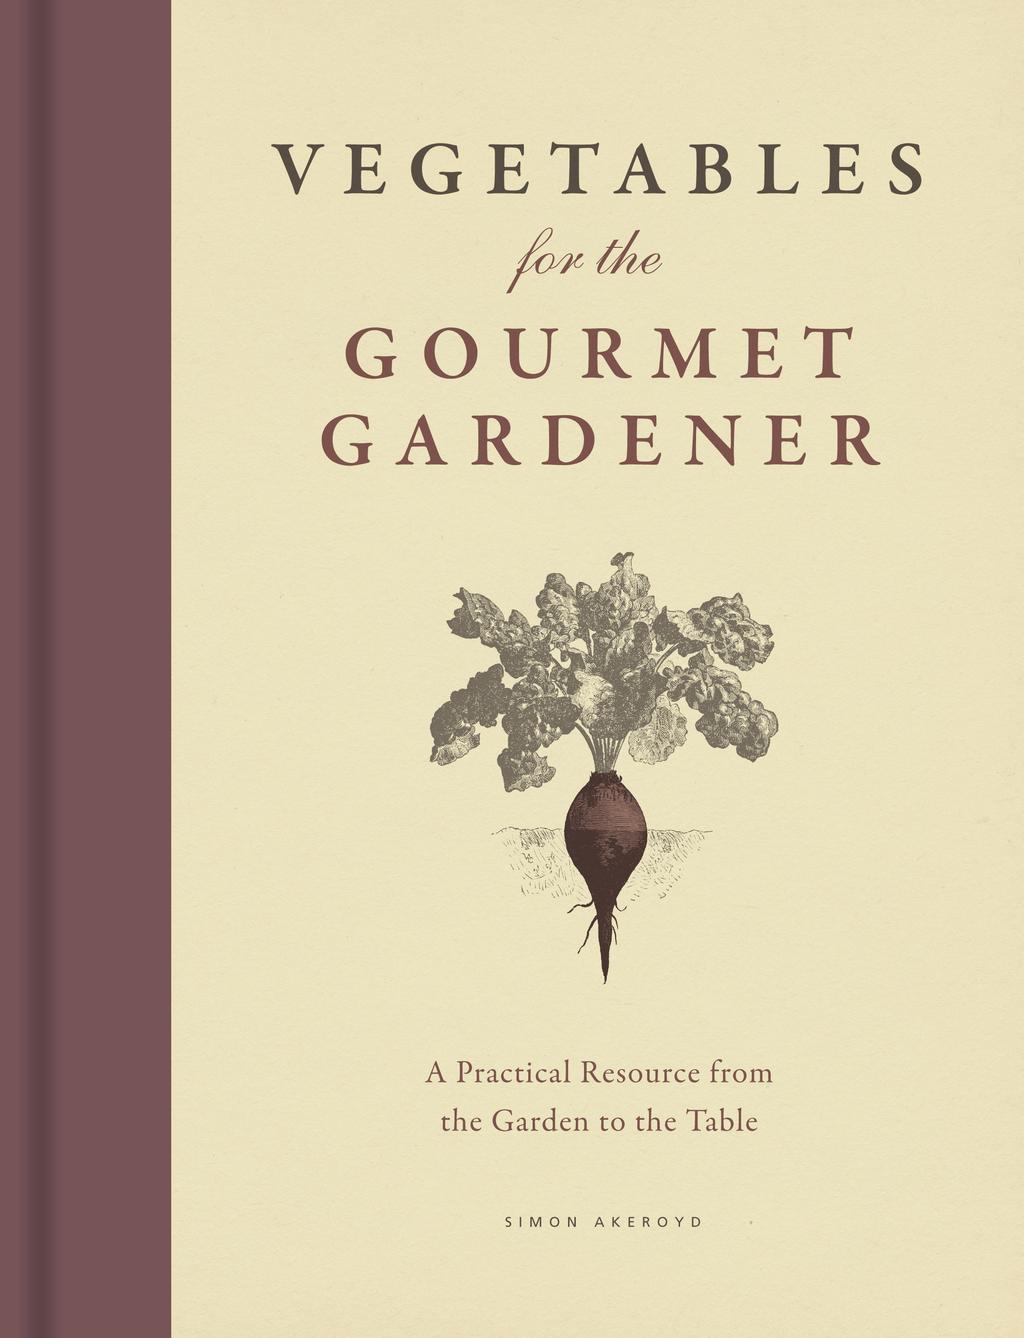 Vegetables for the Gourmet Gardener A Practical Resource from the Garden to the Table By Simon Akeroyd The rise of the slow food movement and the return to home gardens mean cooks are donning